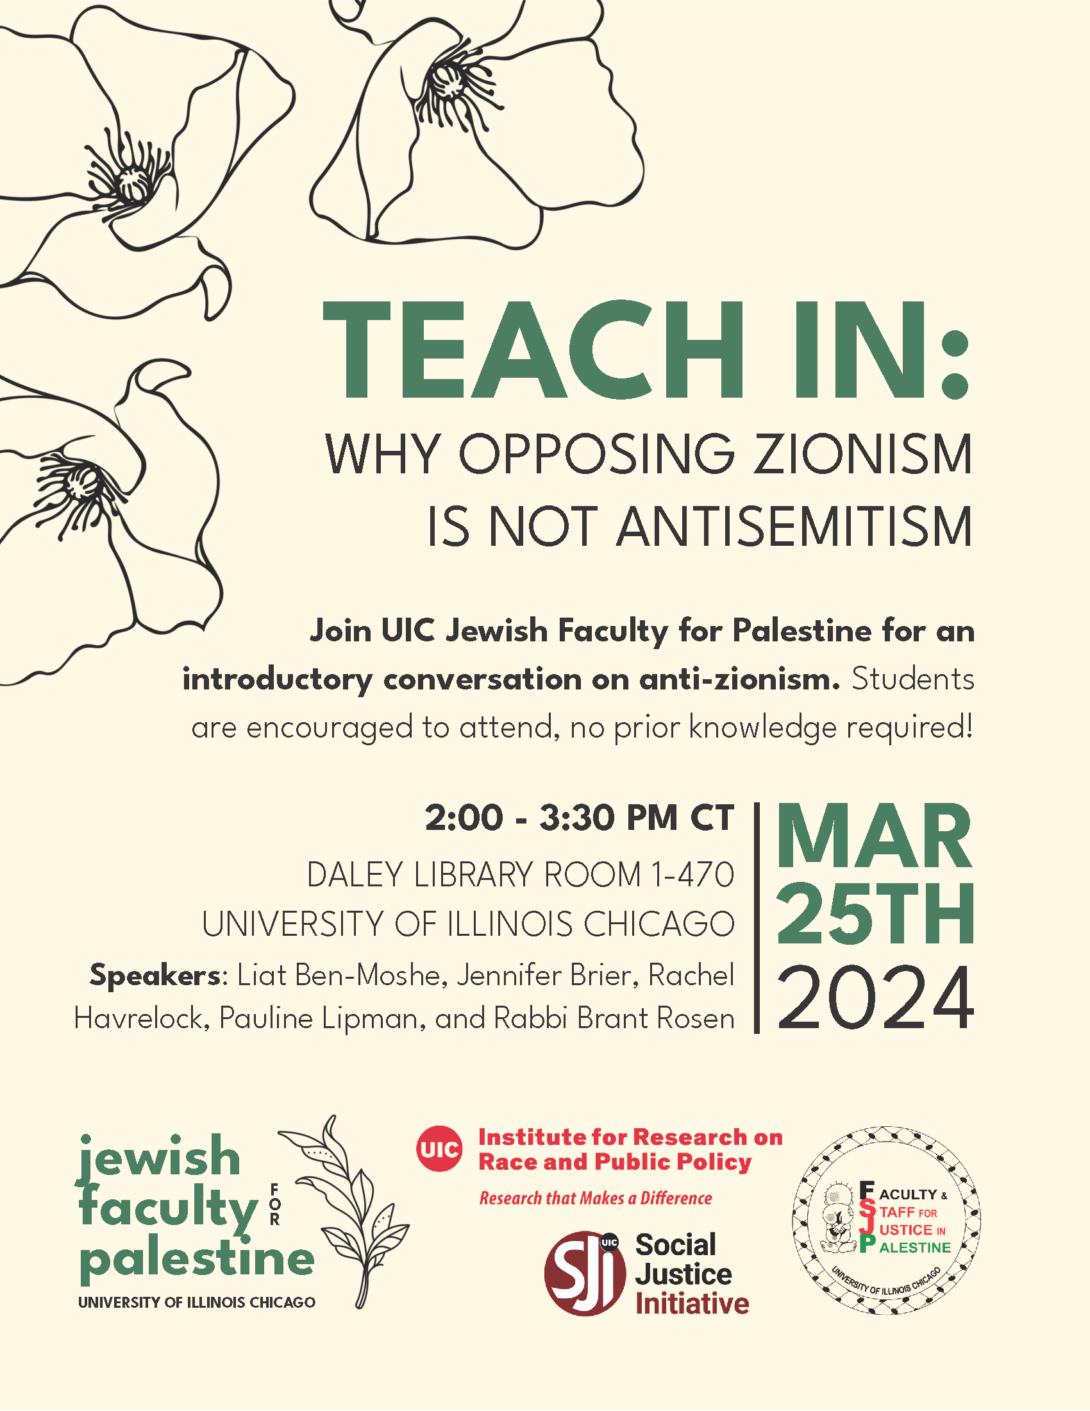 Event flyer with a cream colored background. Black outlined drawings of flowers appear in the top left corner. In In green and black text, the event title, description, date, location, and speakers are listed. Along the bottom of the flyer are logos for the event sponors.